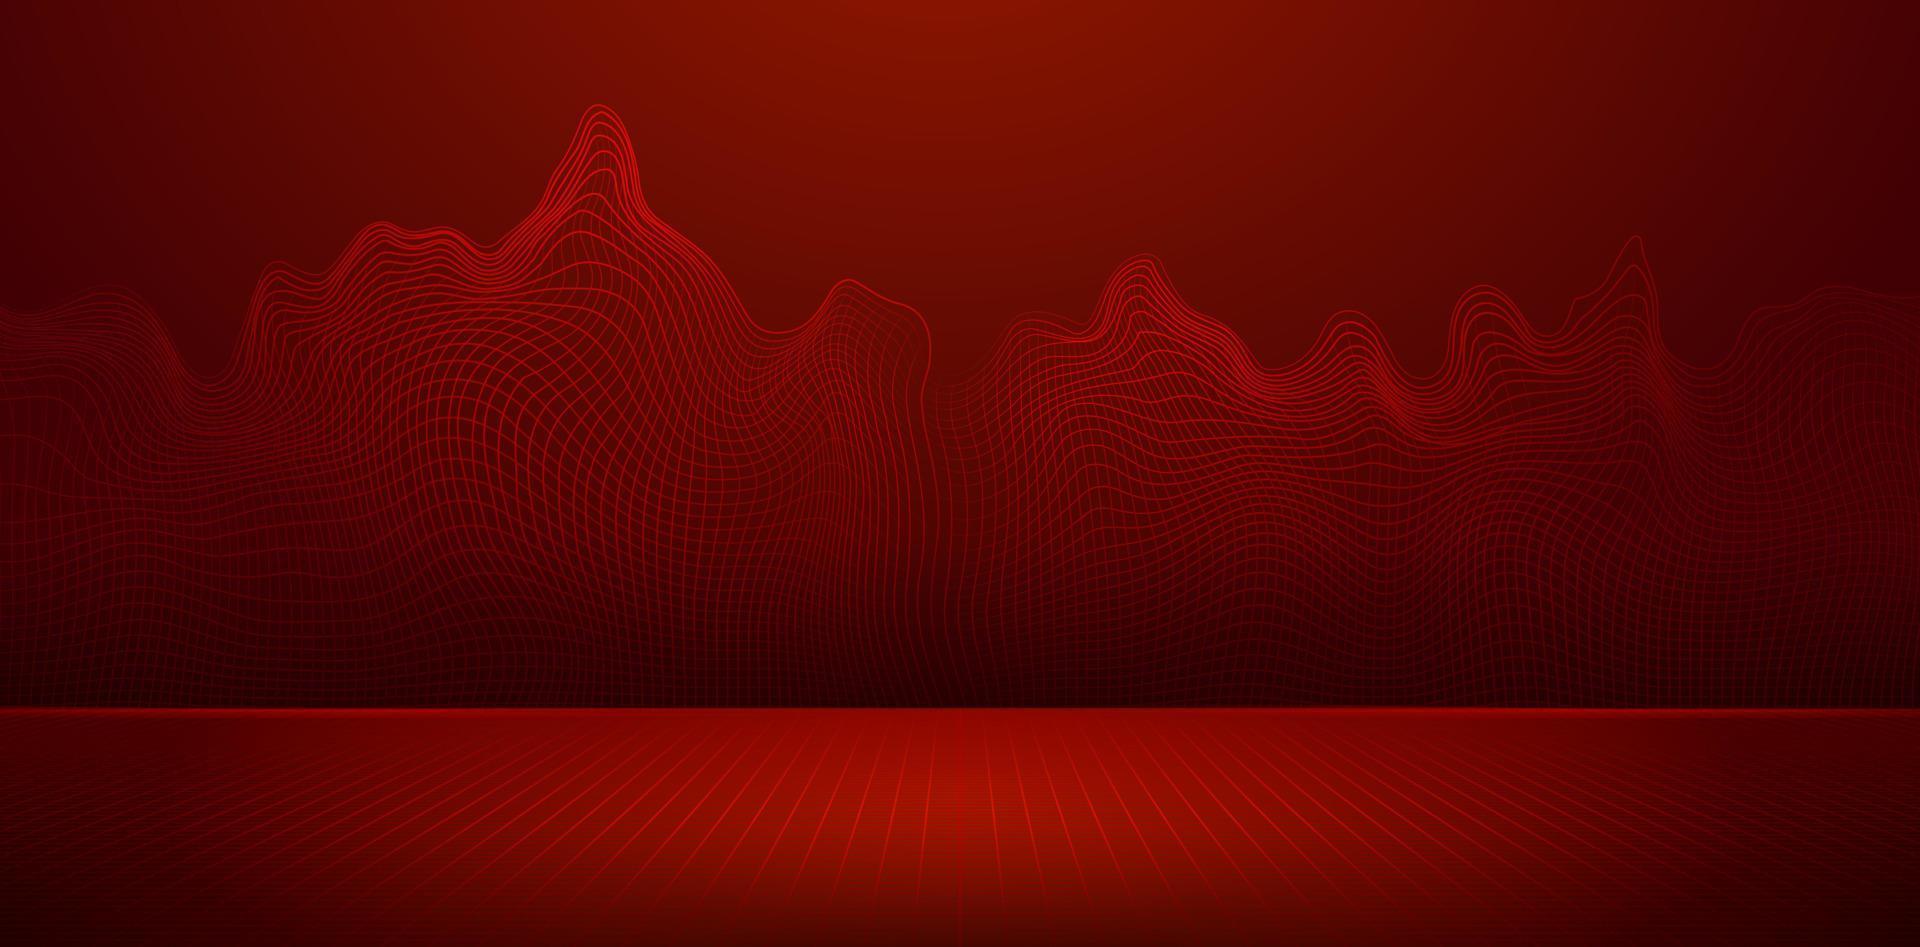 Topography Data Dark Red lines backgrounds for ecommerce signs retail shopping, advertisement business agency, ads campaign marketing, email newsletter, landing pages, header webs, video animation pic vector